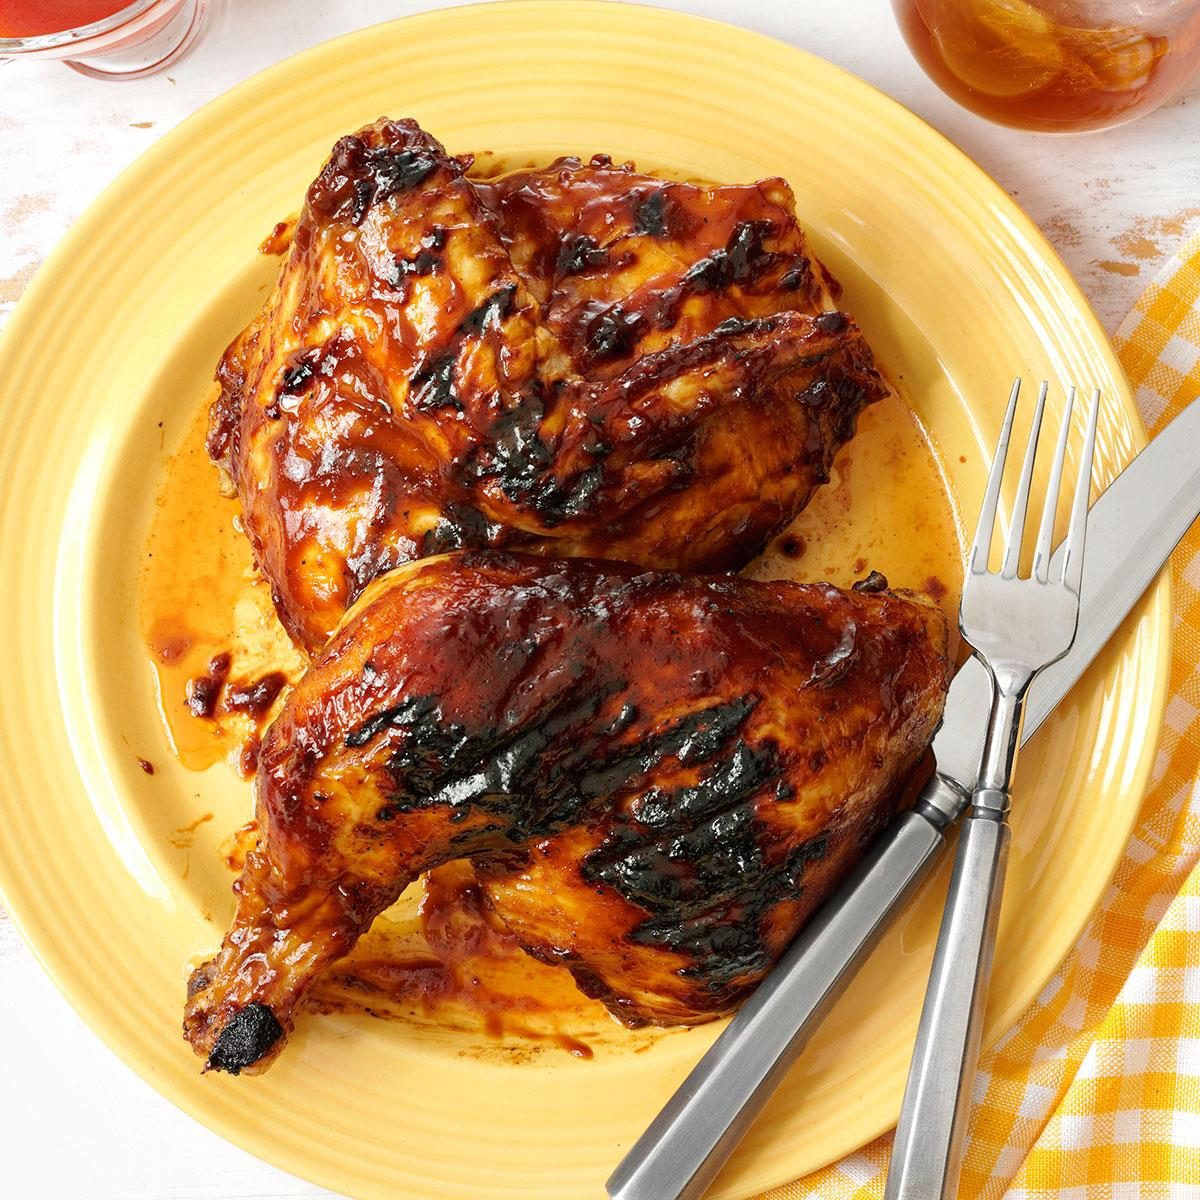 What is an easy recipe for barbecue chicken?